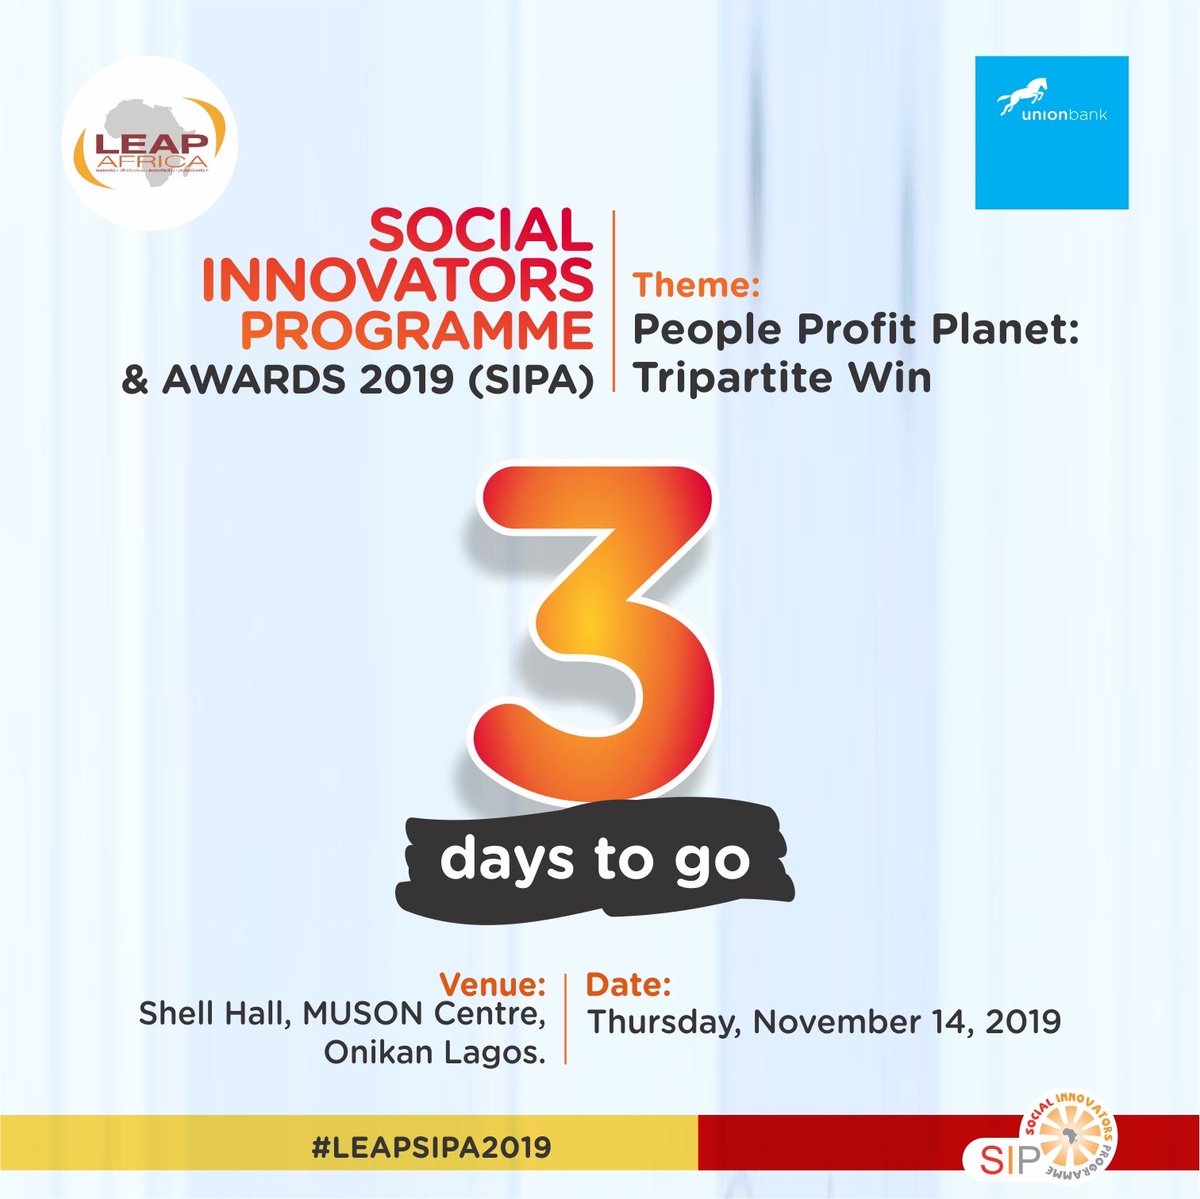 Attendance is FREE! 
Union Bank is our Flagship Sponsor⠀⠀
⠀⠀
Register to attend by clicking on link in bio .... ⠀
⠀
#peopleprofitplanet #socialdevelopment #sipa2019⠀
#socialinnovation